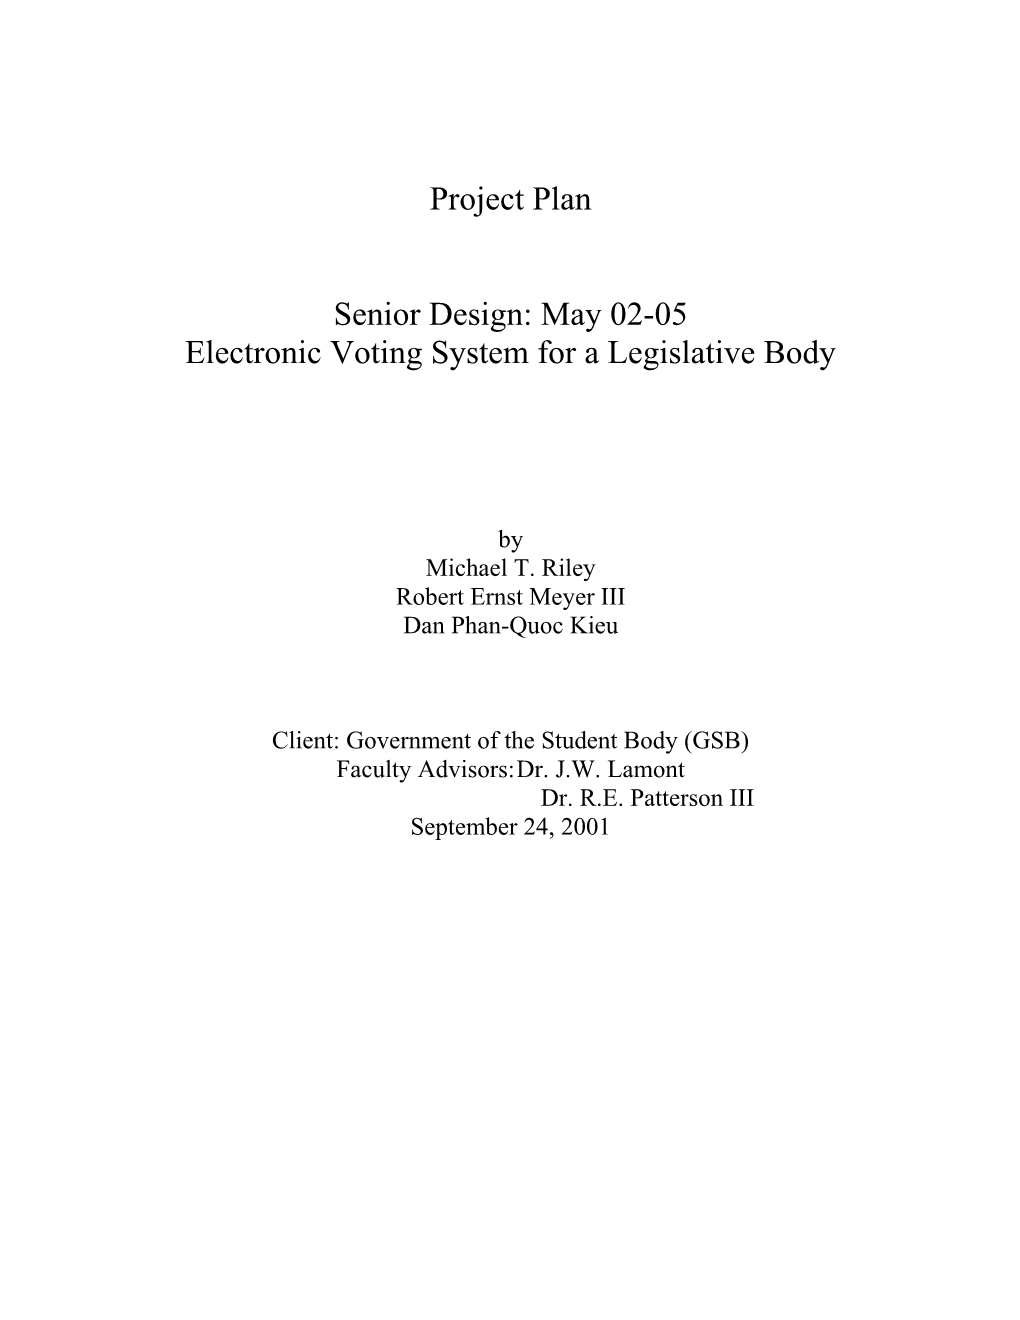 Electronic Voting System for a Legislative Body